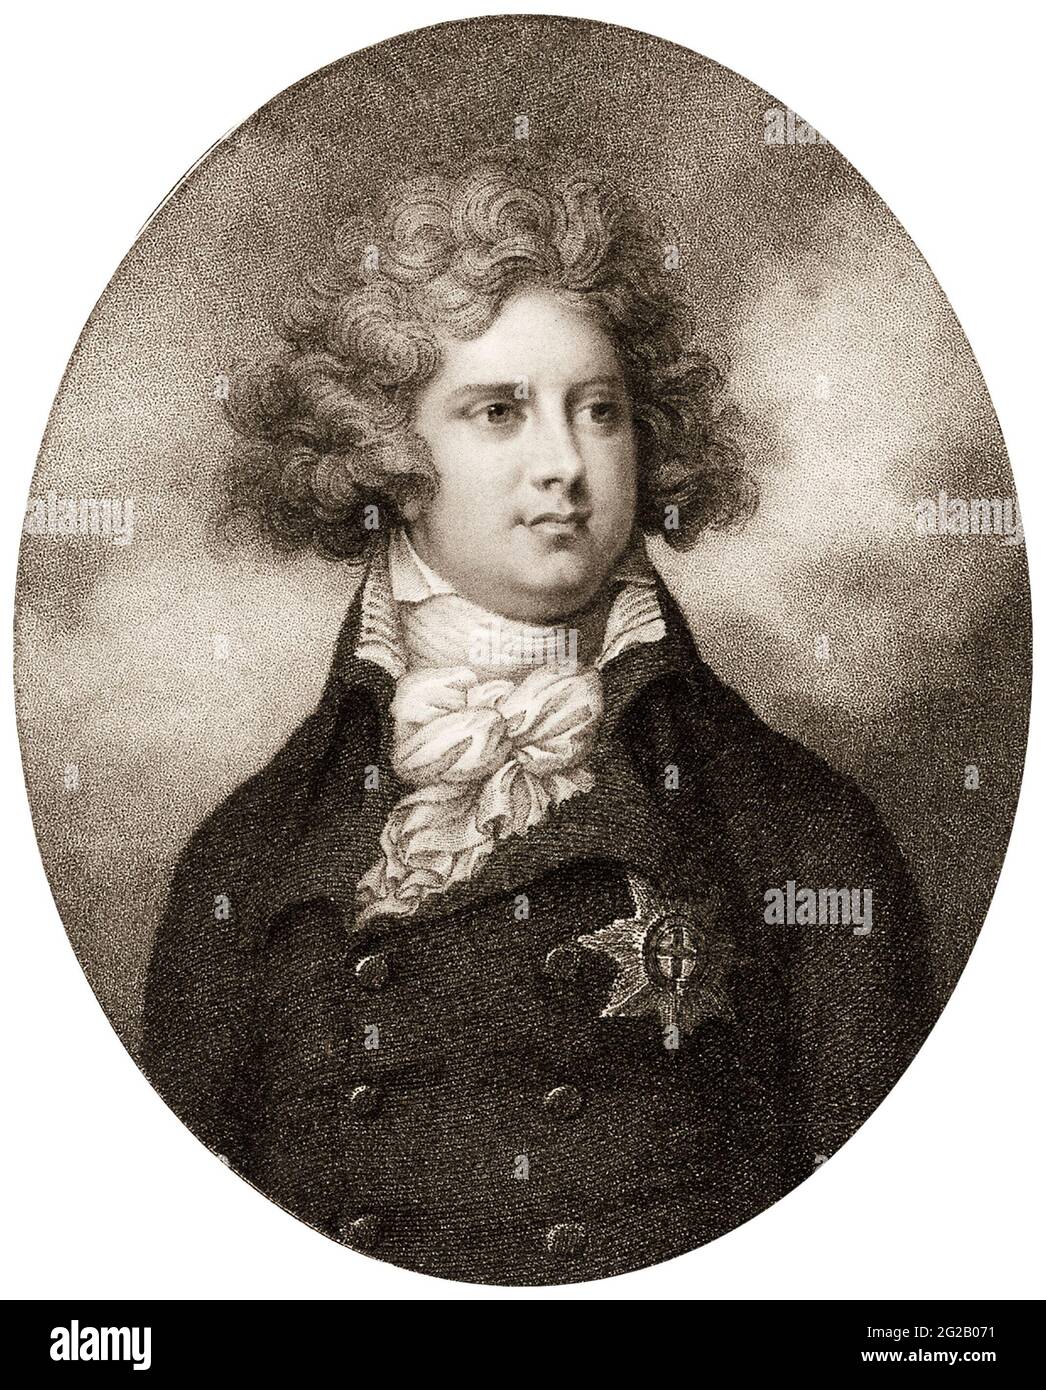 George (1762–1830) Prince of Wales, later George IV, King of the United Kingdom of Great Britain and Ireland and King of Hanover (1820-1830), portrait engraving by John Conde after Richard Cosway, 1794 Stock Photo